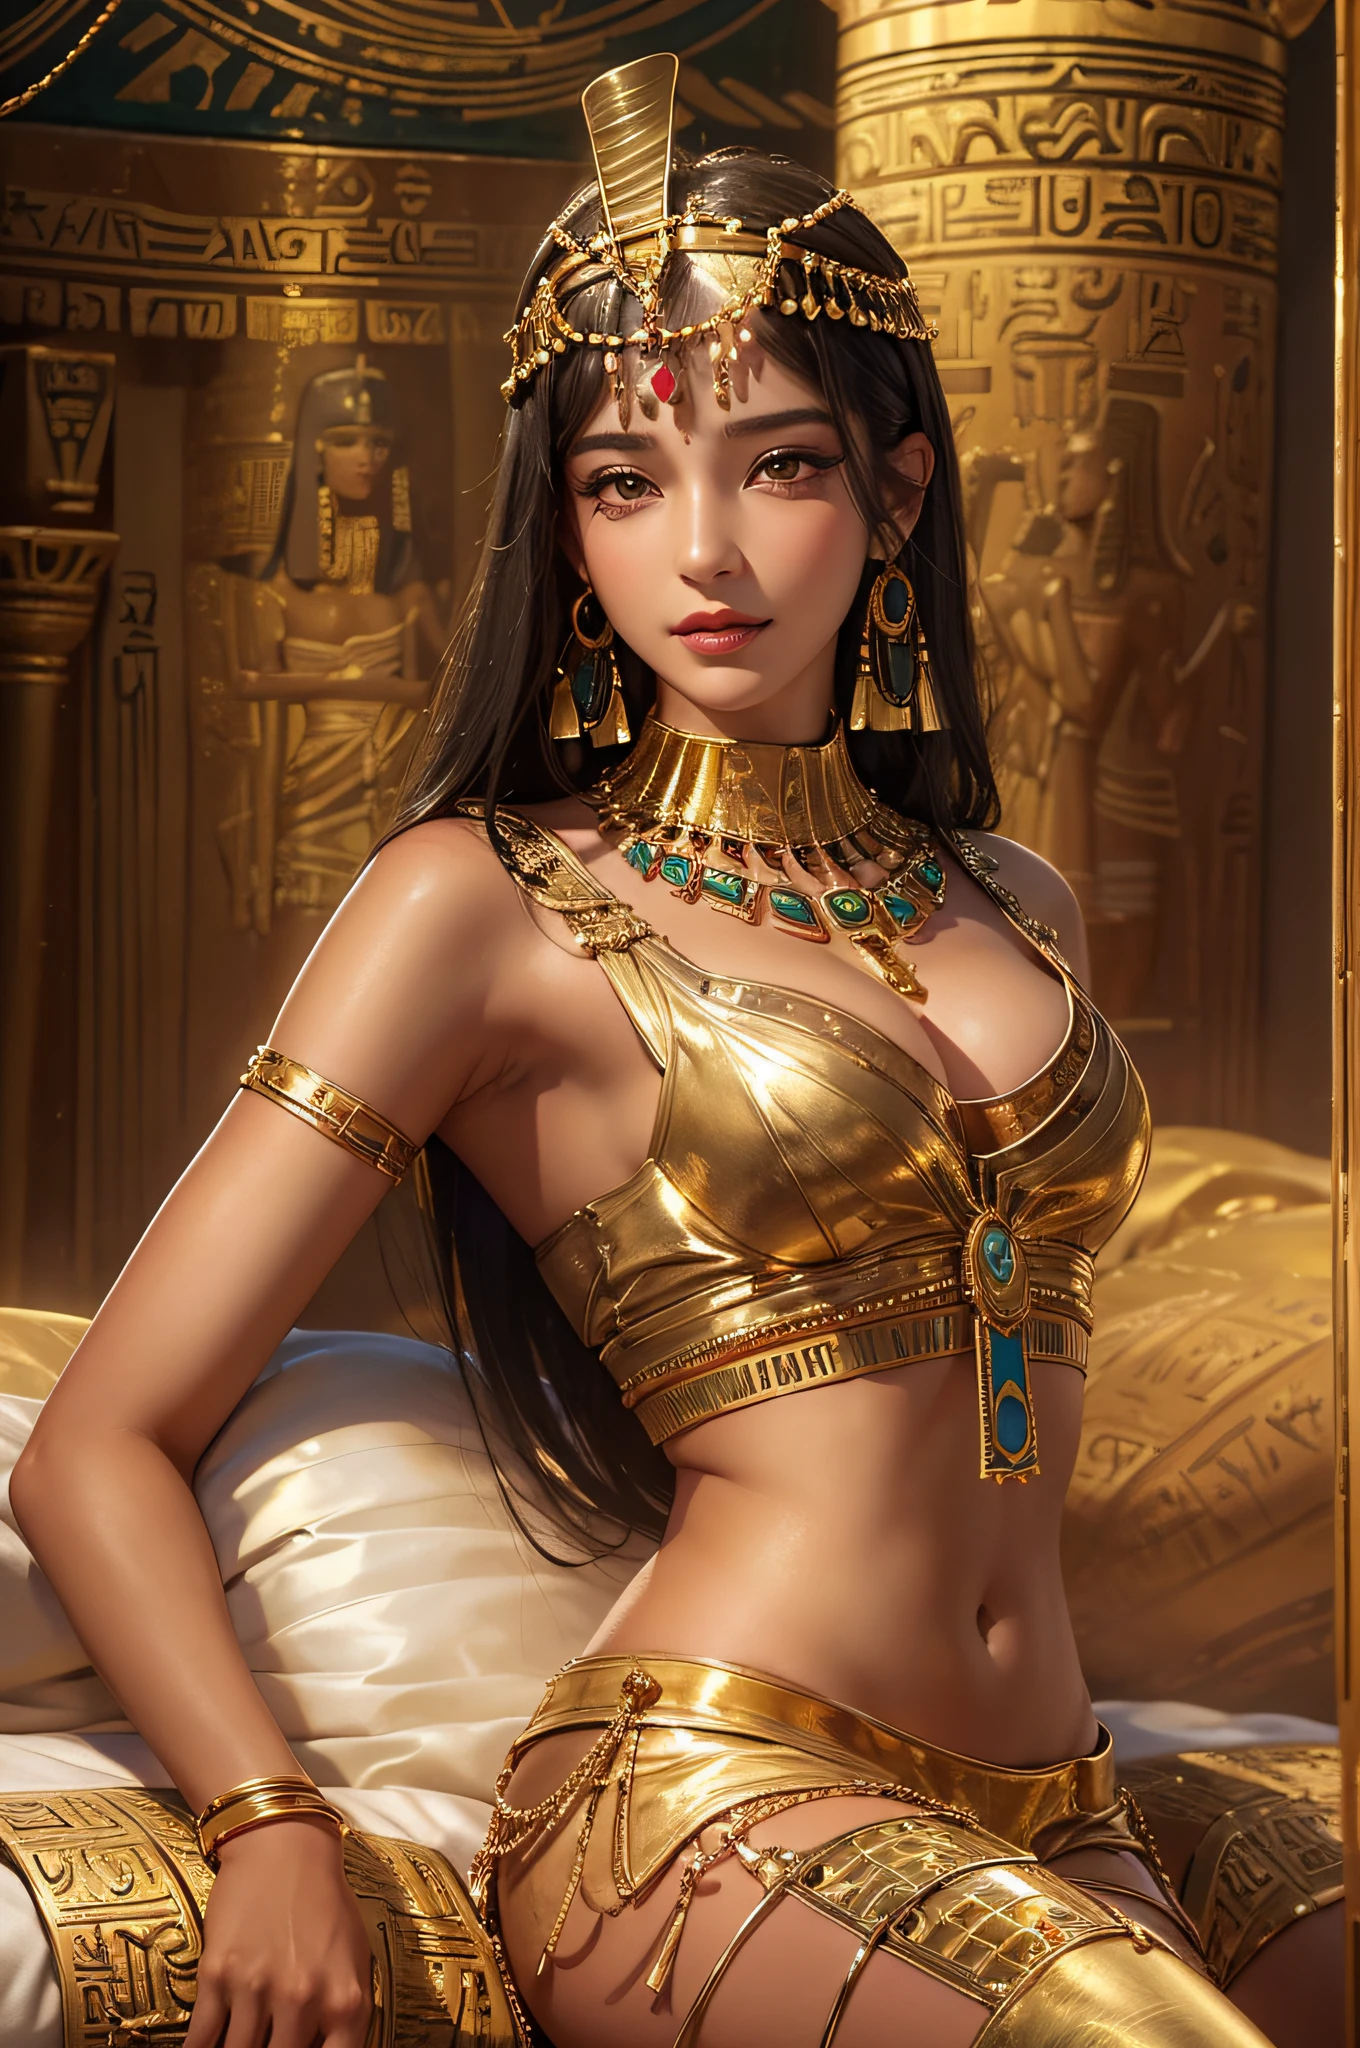 Sexy mature Cleopatra,Cleopatra,Ancient Egyptian palace,wearing ancient egyptian clothing,Ancient Egyptian decorated rooms,Ancient egyptian arranged background,Lie on the big bed(An extremely delicate and beautiful work:1.2)a very beautiful and sexy woman, Sexy and seductive, Have perfect body proportions,Tight and sexy body(Bigboobs)Perfect body curves,Moisturizes skin,clear skin texture,moist skin feeling(Advanced skin details:1.1)attractive smile,Flawless Face,black long straight hair,clear hair texture,Delicate hair(Quality hair details:1.1)egyptian dancer costume,Beautiful and delicate eyebrows and eyelashes,pretty eye makeup,Clear eye details,8K primary school students(Advanced eye detail:1.1)sensual lips(Perfect lip shape)(seduct smile) The optimal ratio of four fingers and one thumb,Wearing gold earrings,golden necklace,Golden bangles,Gold anklet,Gold-tone waist chain,headgear,Gold foil series,Cleopatra series,Master of photography,Perfect masterpiece,Best Picture Quality,ultra - detailed, Ultra-high resolution, realistically, RAW photos